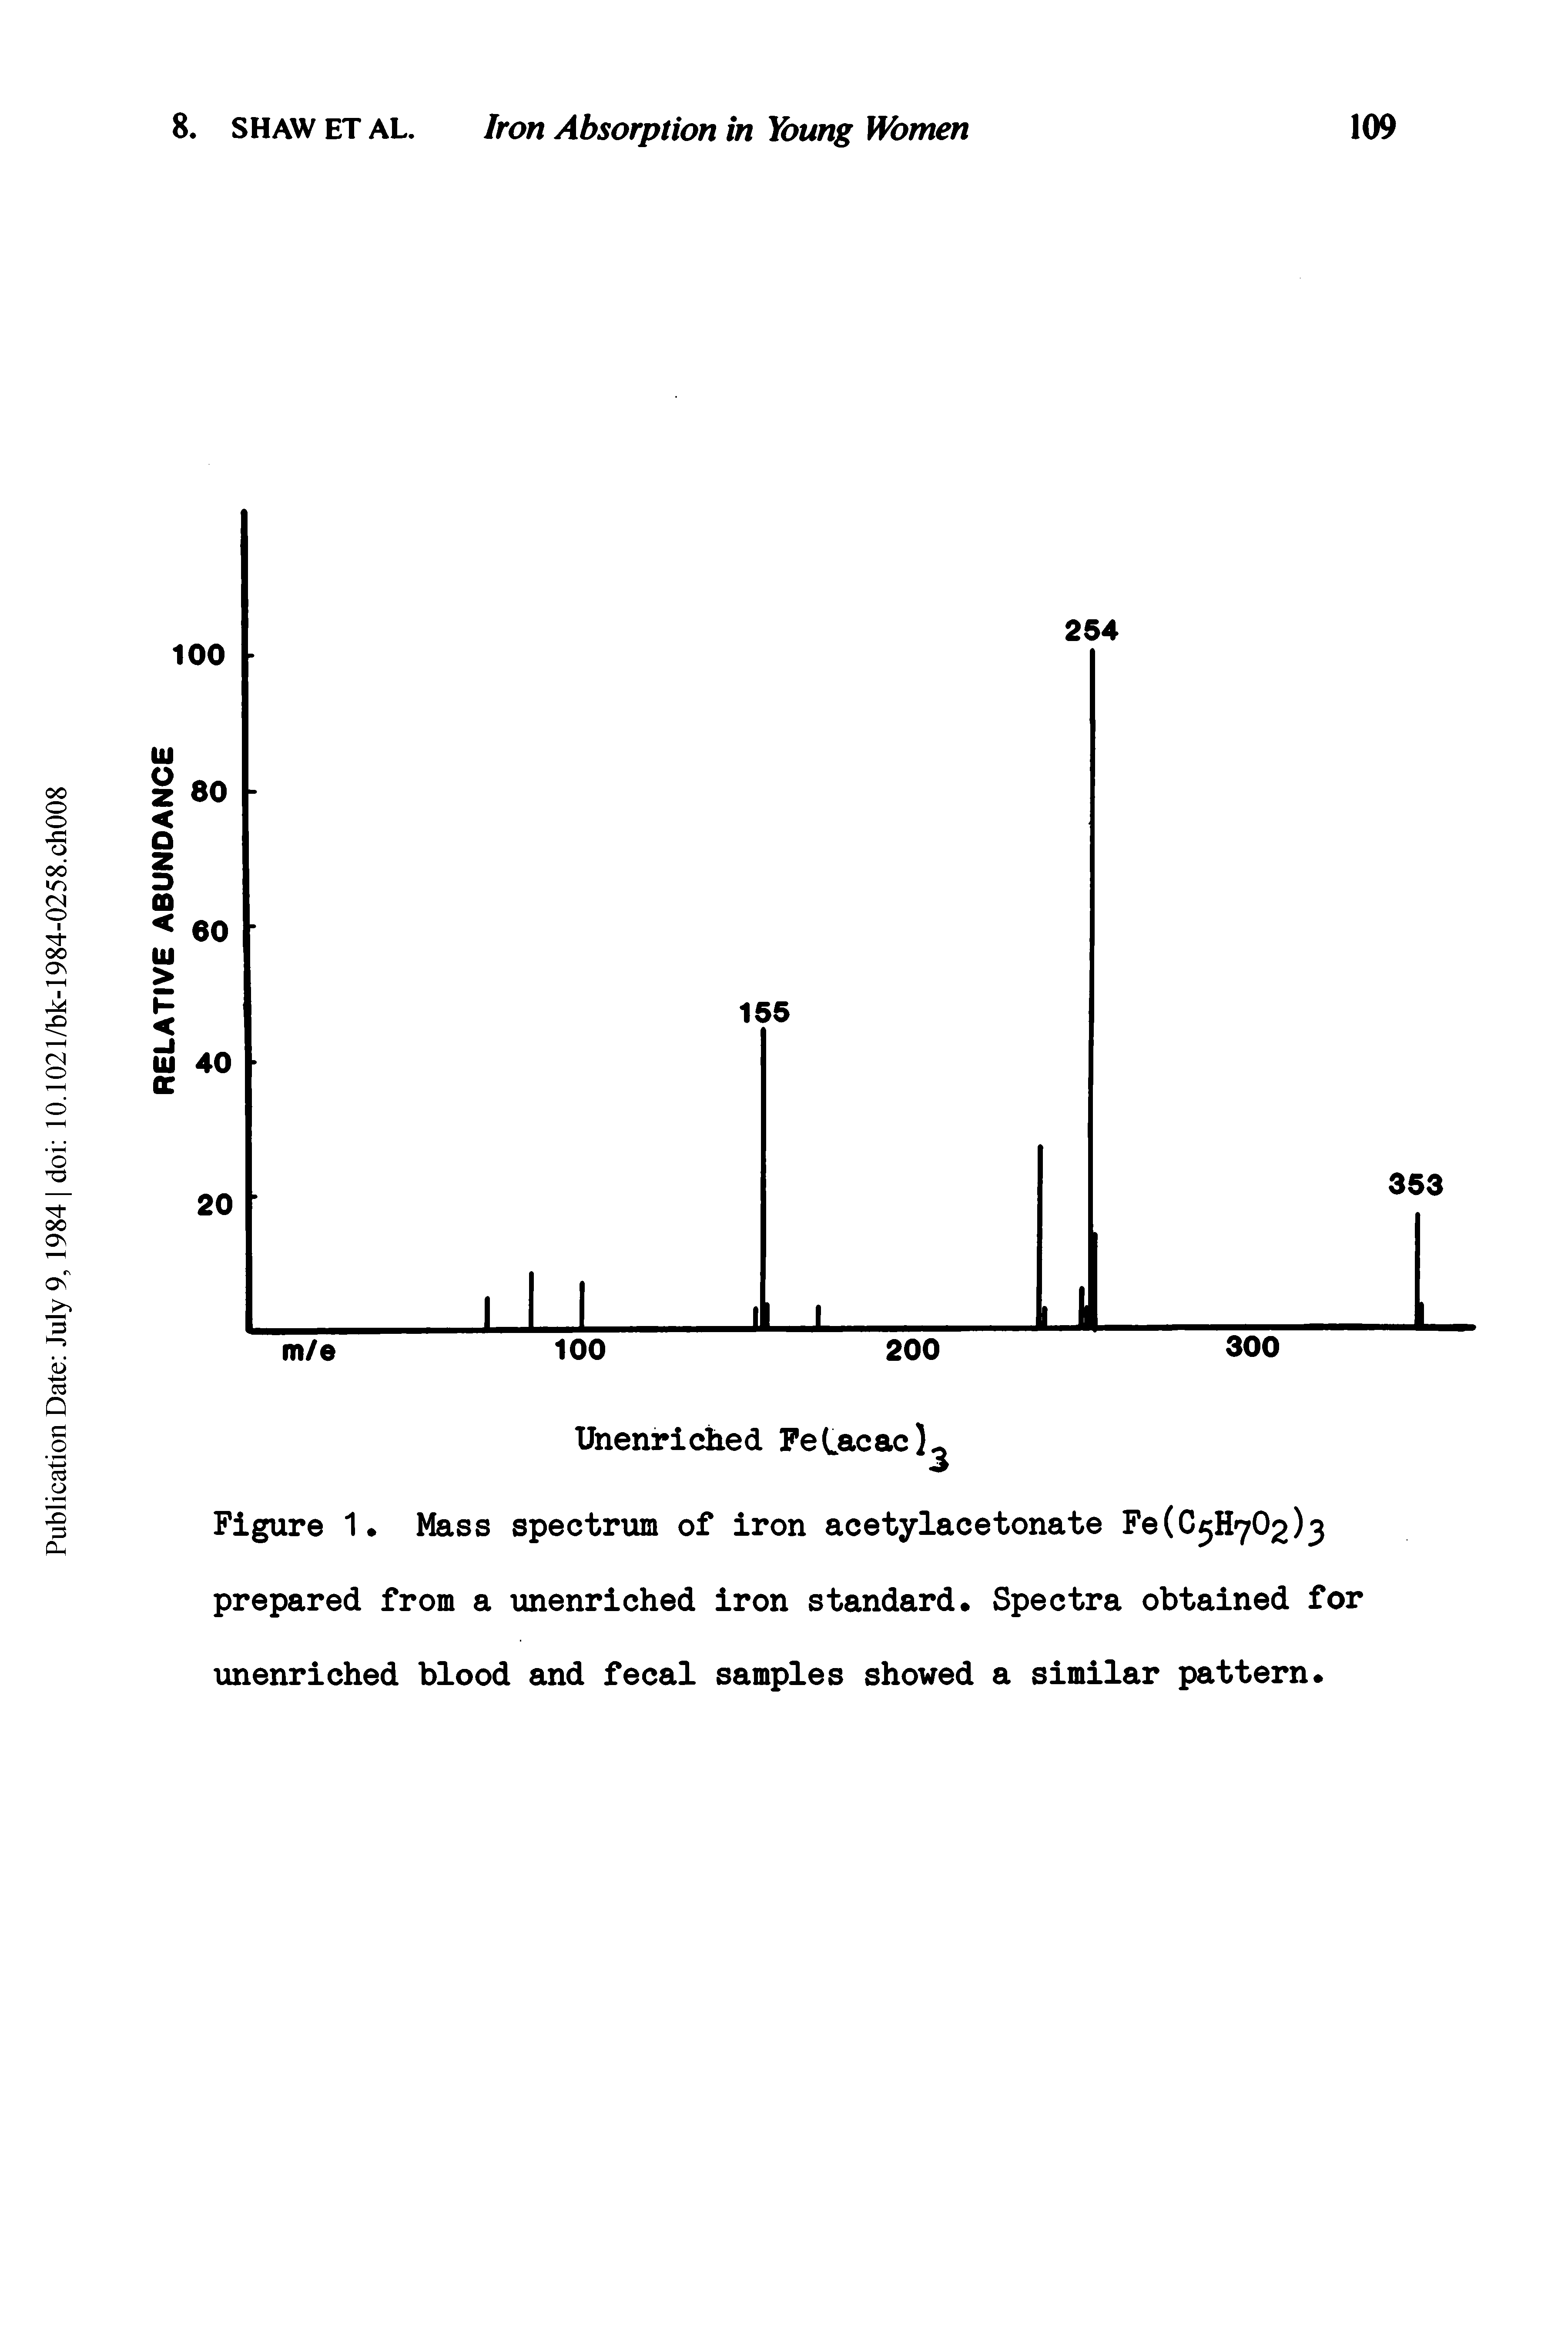 Figure 1. Mass spectrum of iron acetylacetonate Fe(C5H702)3 prepared from a unenriched iron standard. Spectra obtained for unenriched blood and fecal samples showed a similar pattern.